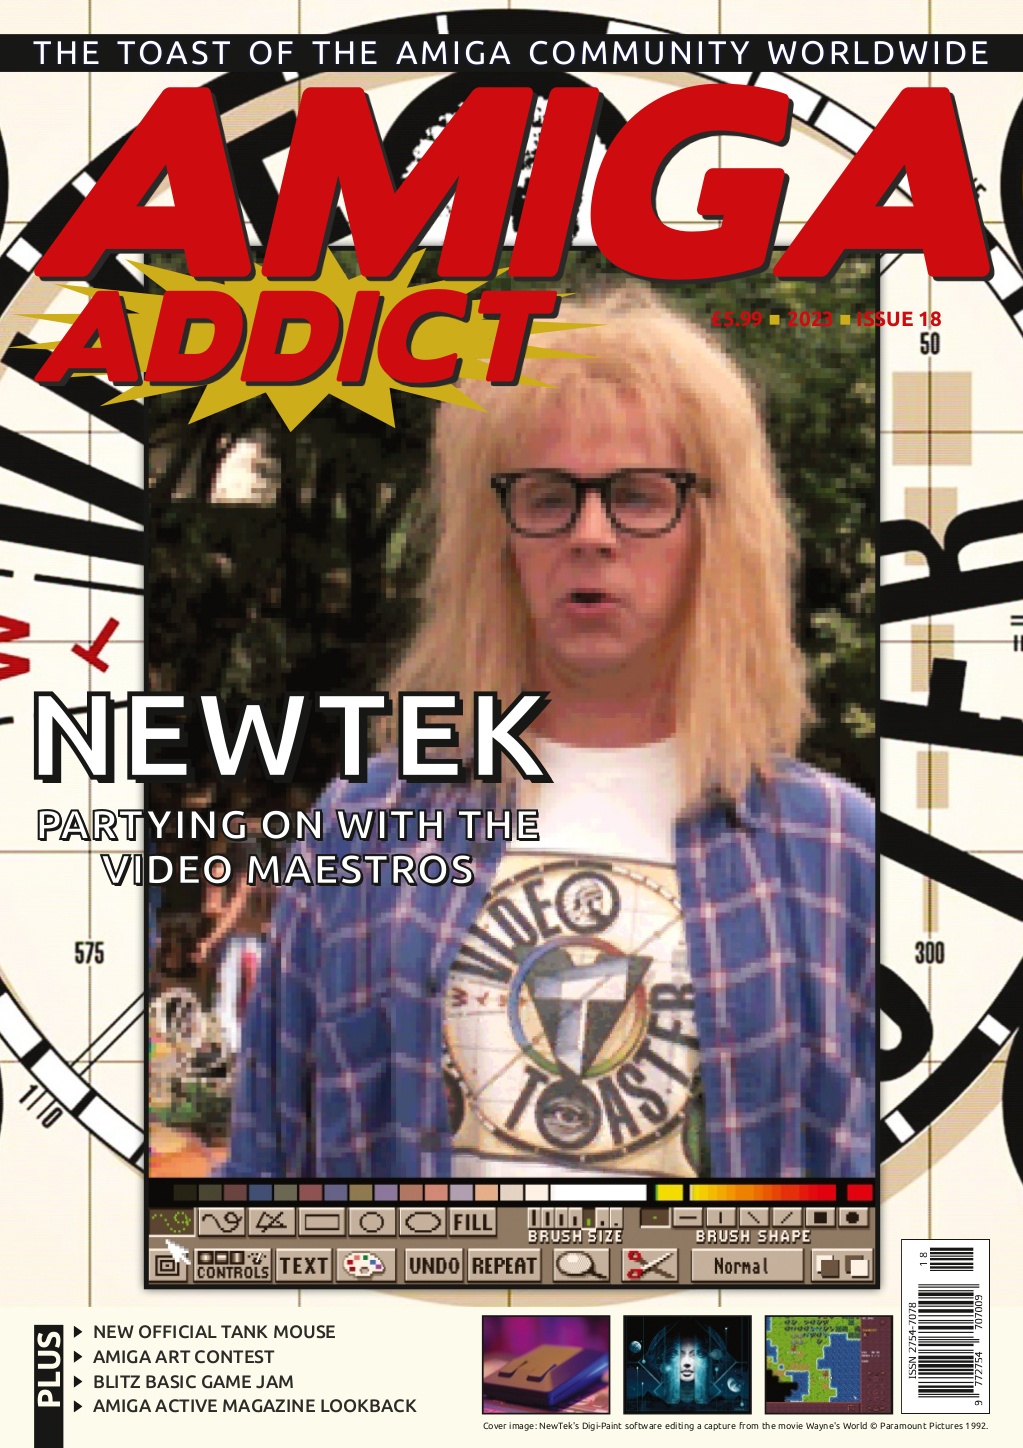 Britain's best-selling magazine for Amiga computer users and Amiga gamers.